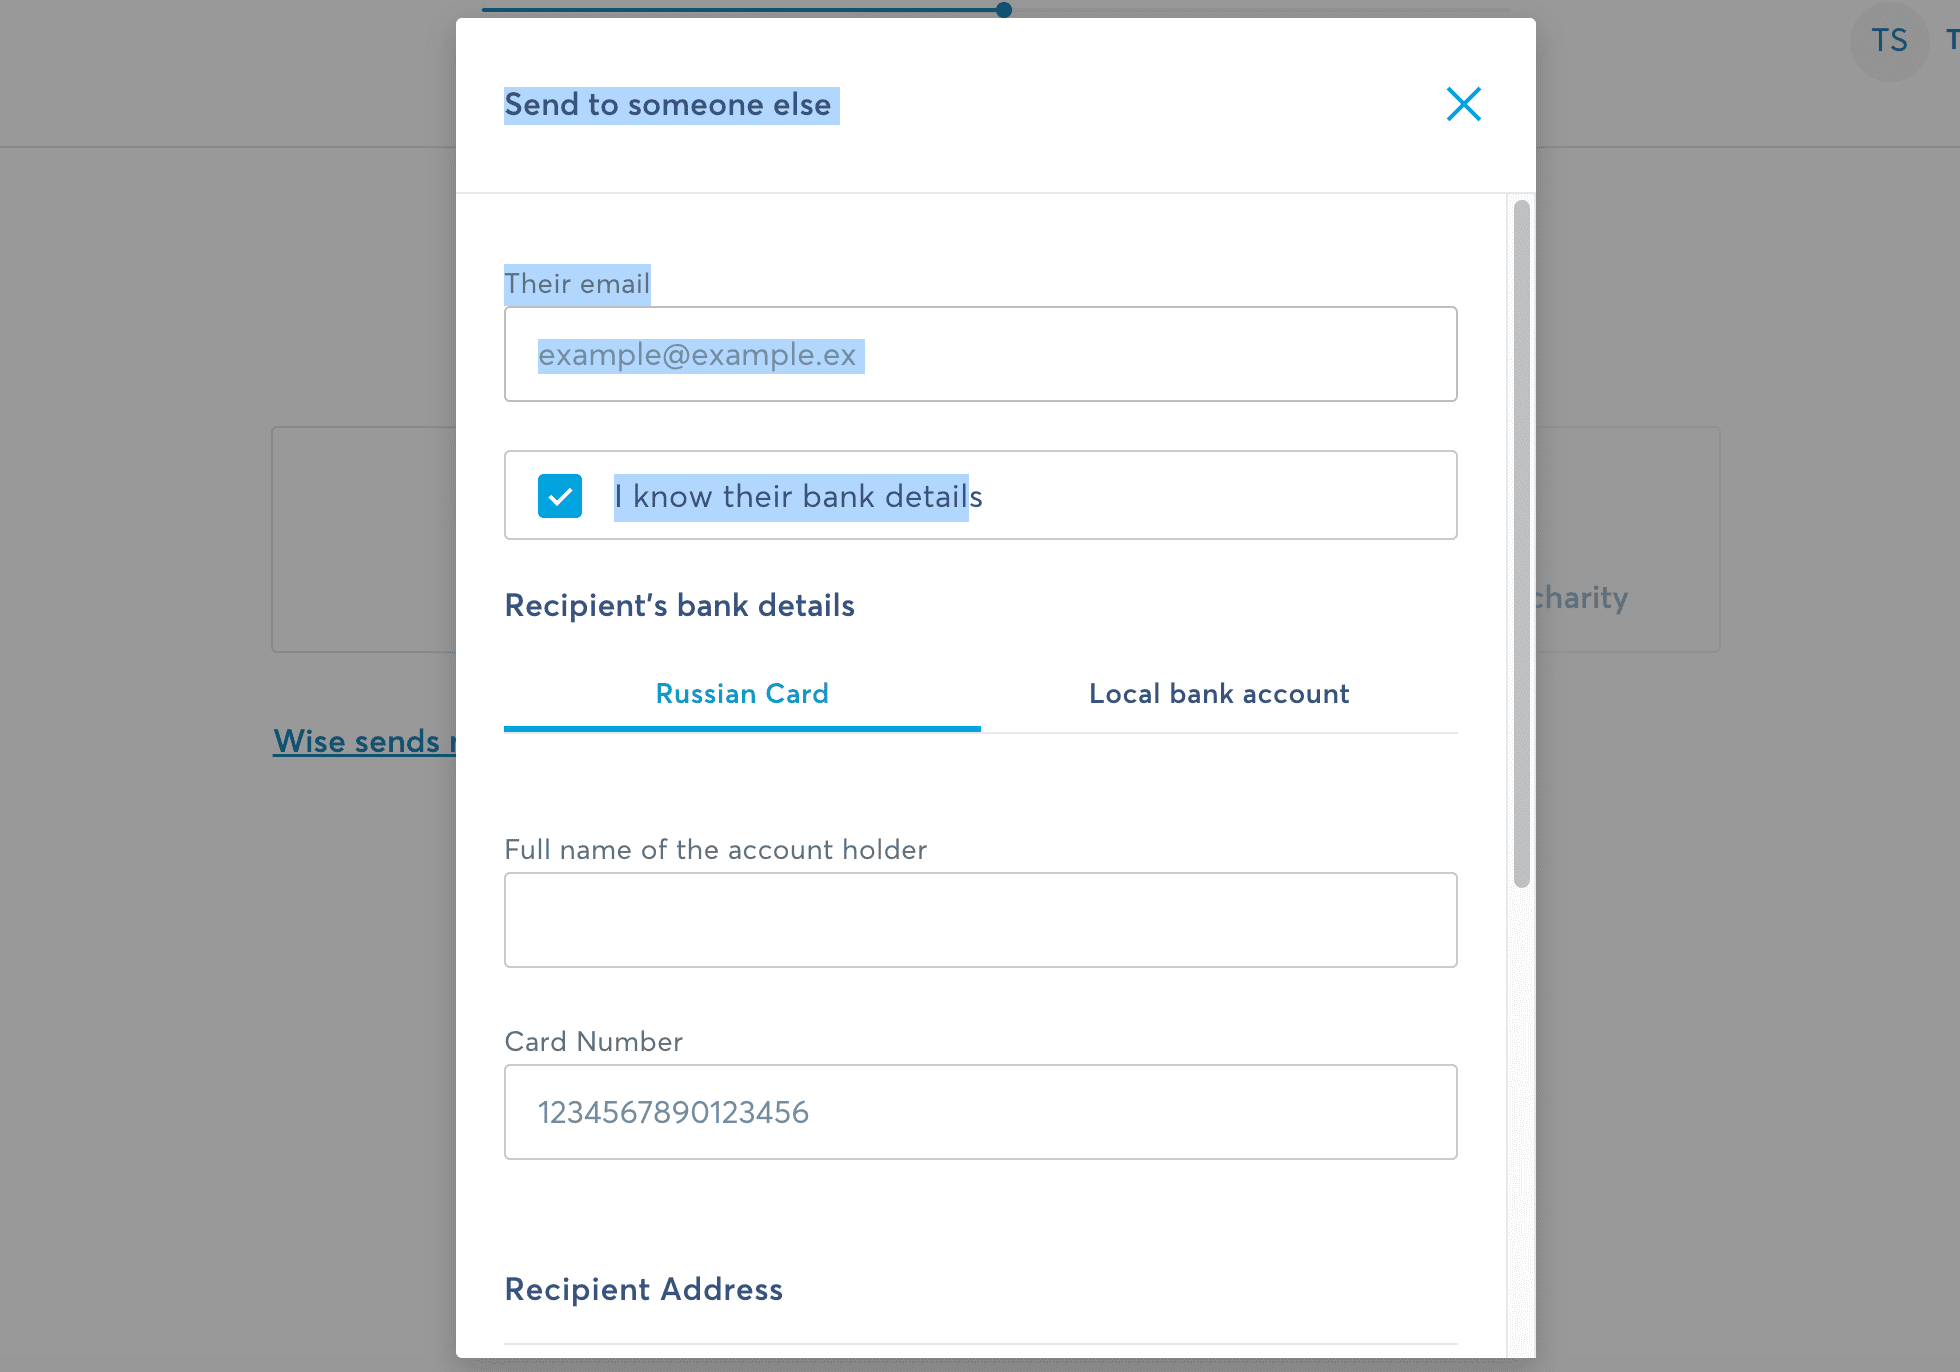 Fill-in the receiver's bank account details